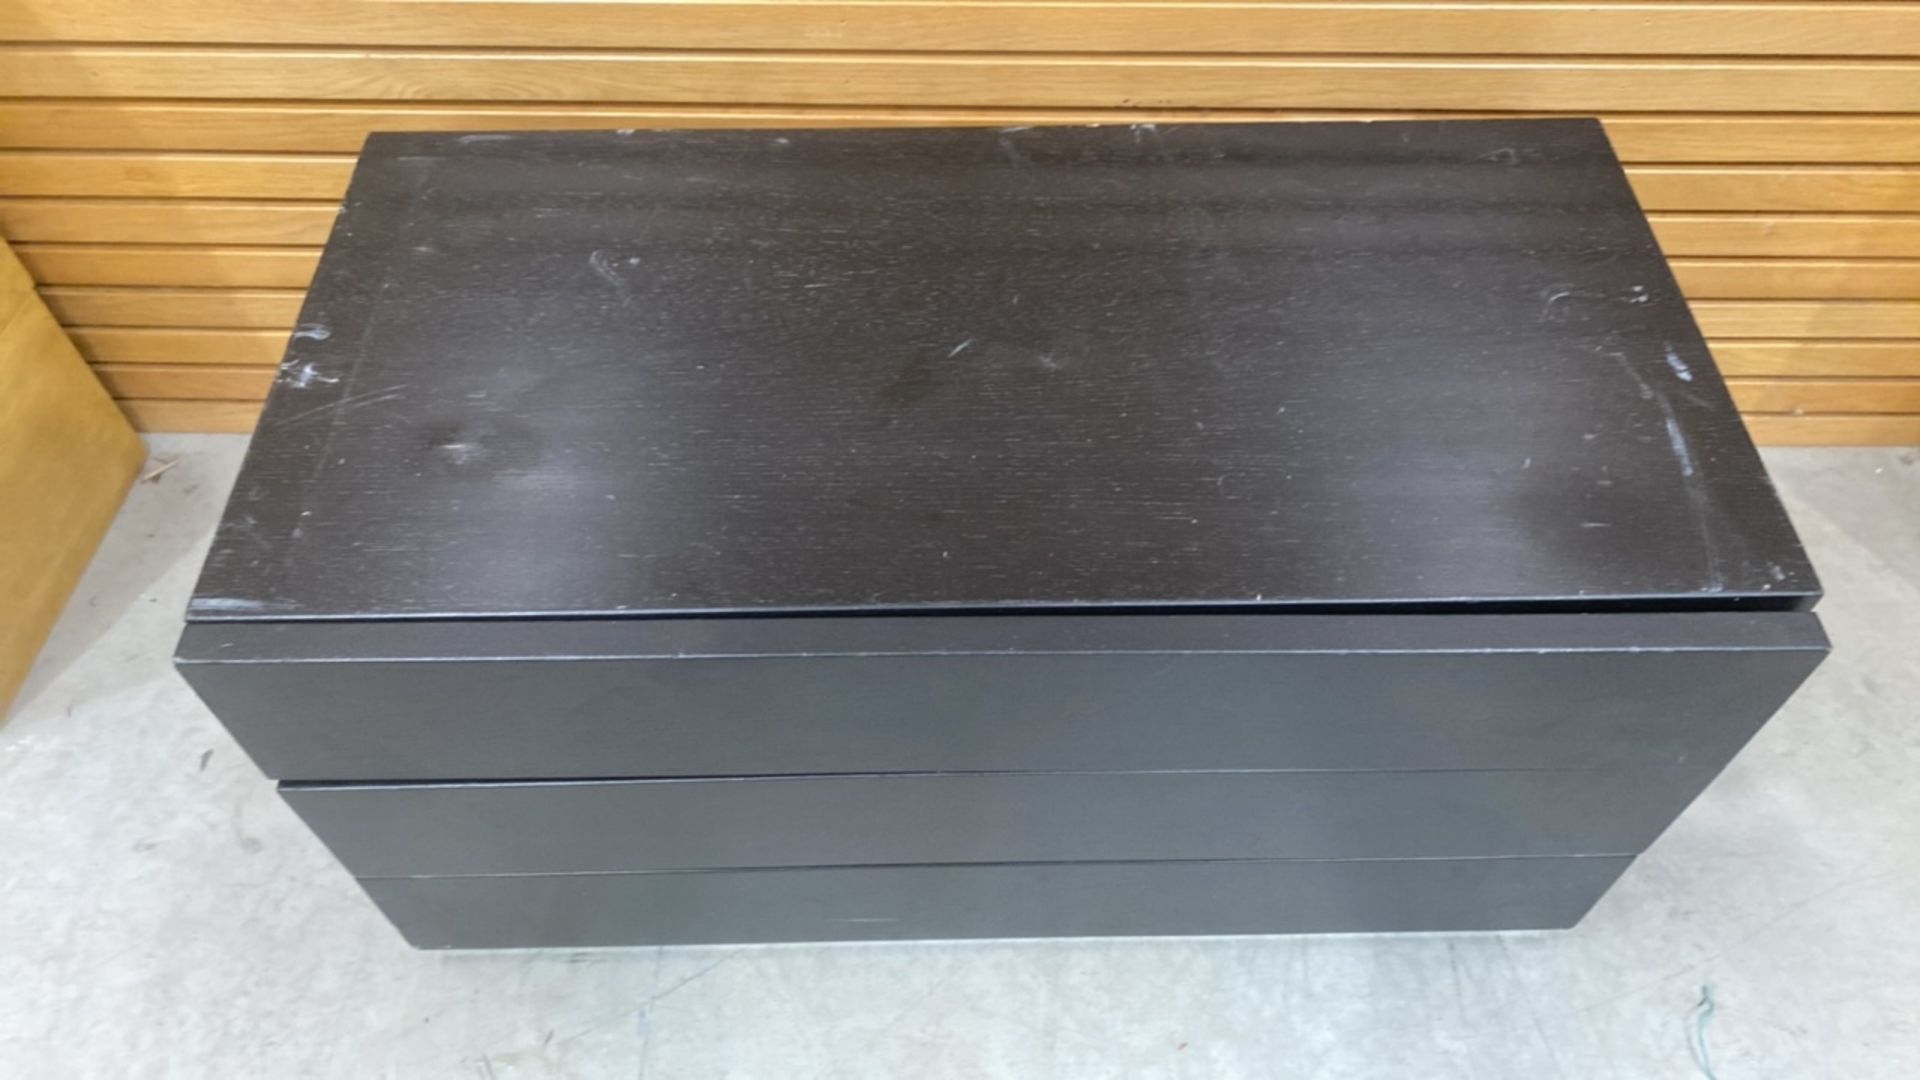 Black Wooden Side Table With 2 Drawers - Image 2 of 3